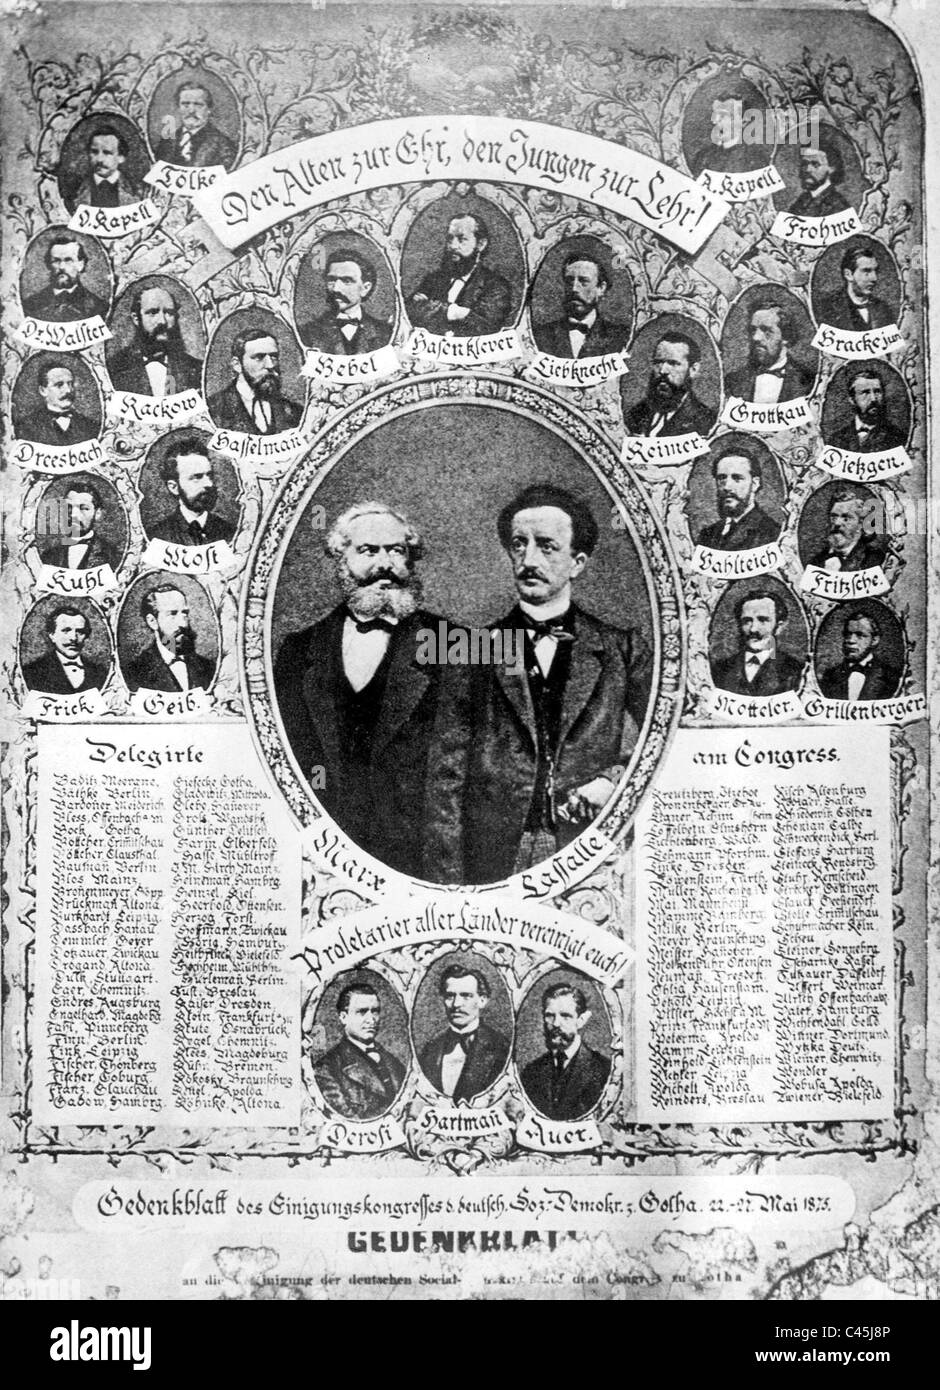 Commemorative Journal of the unification congress of the SPD, 1875 Stock Photo